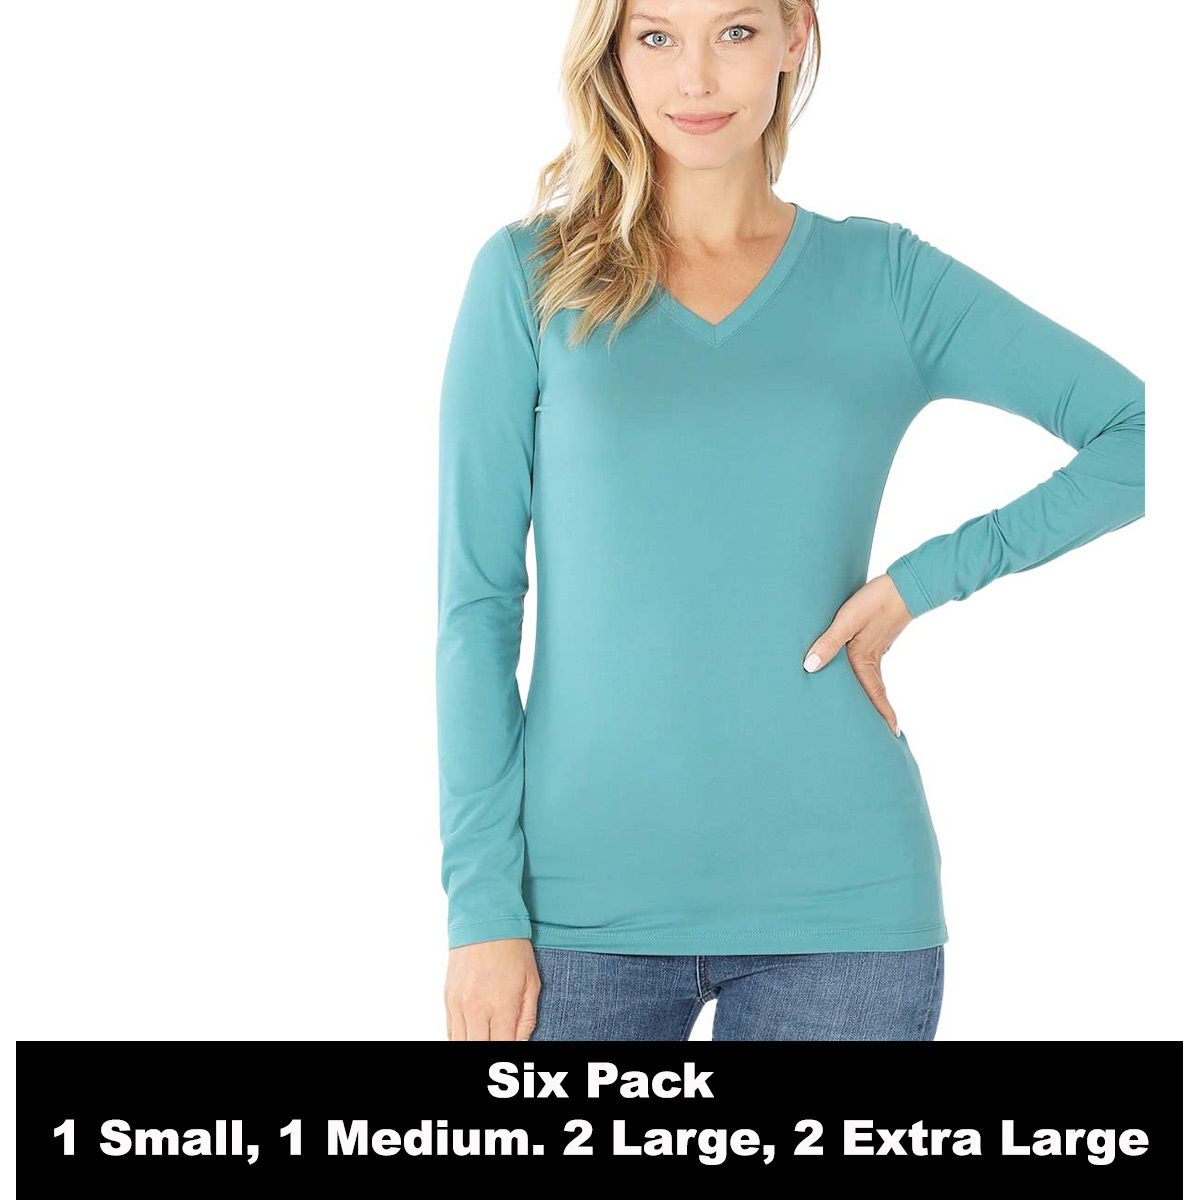 2054 - Dusty Teal<br>
(SIX PACK) 